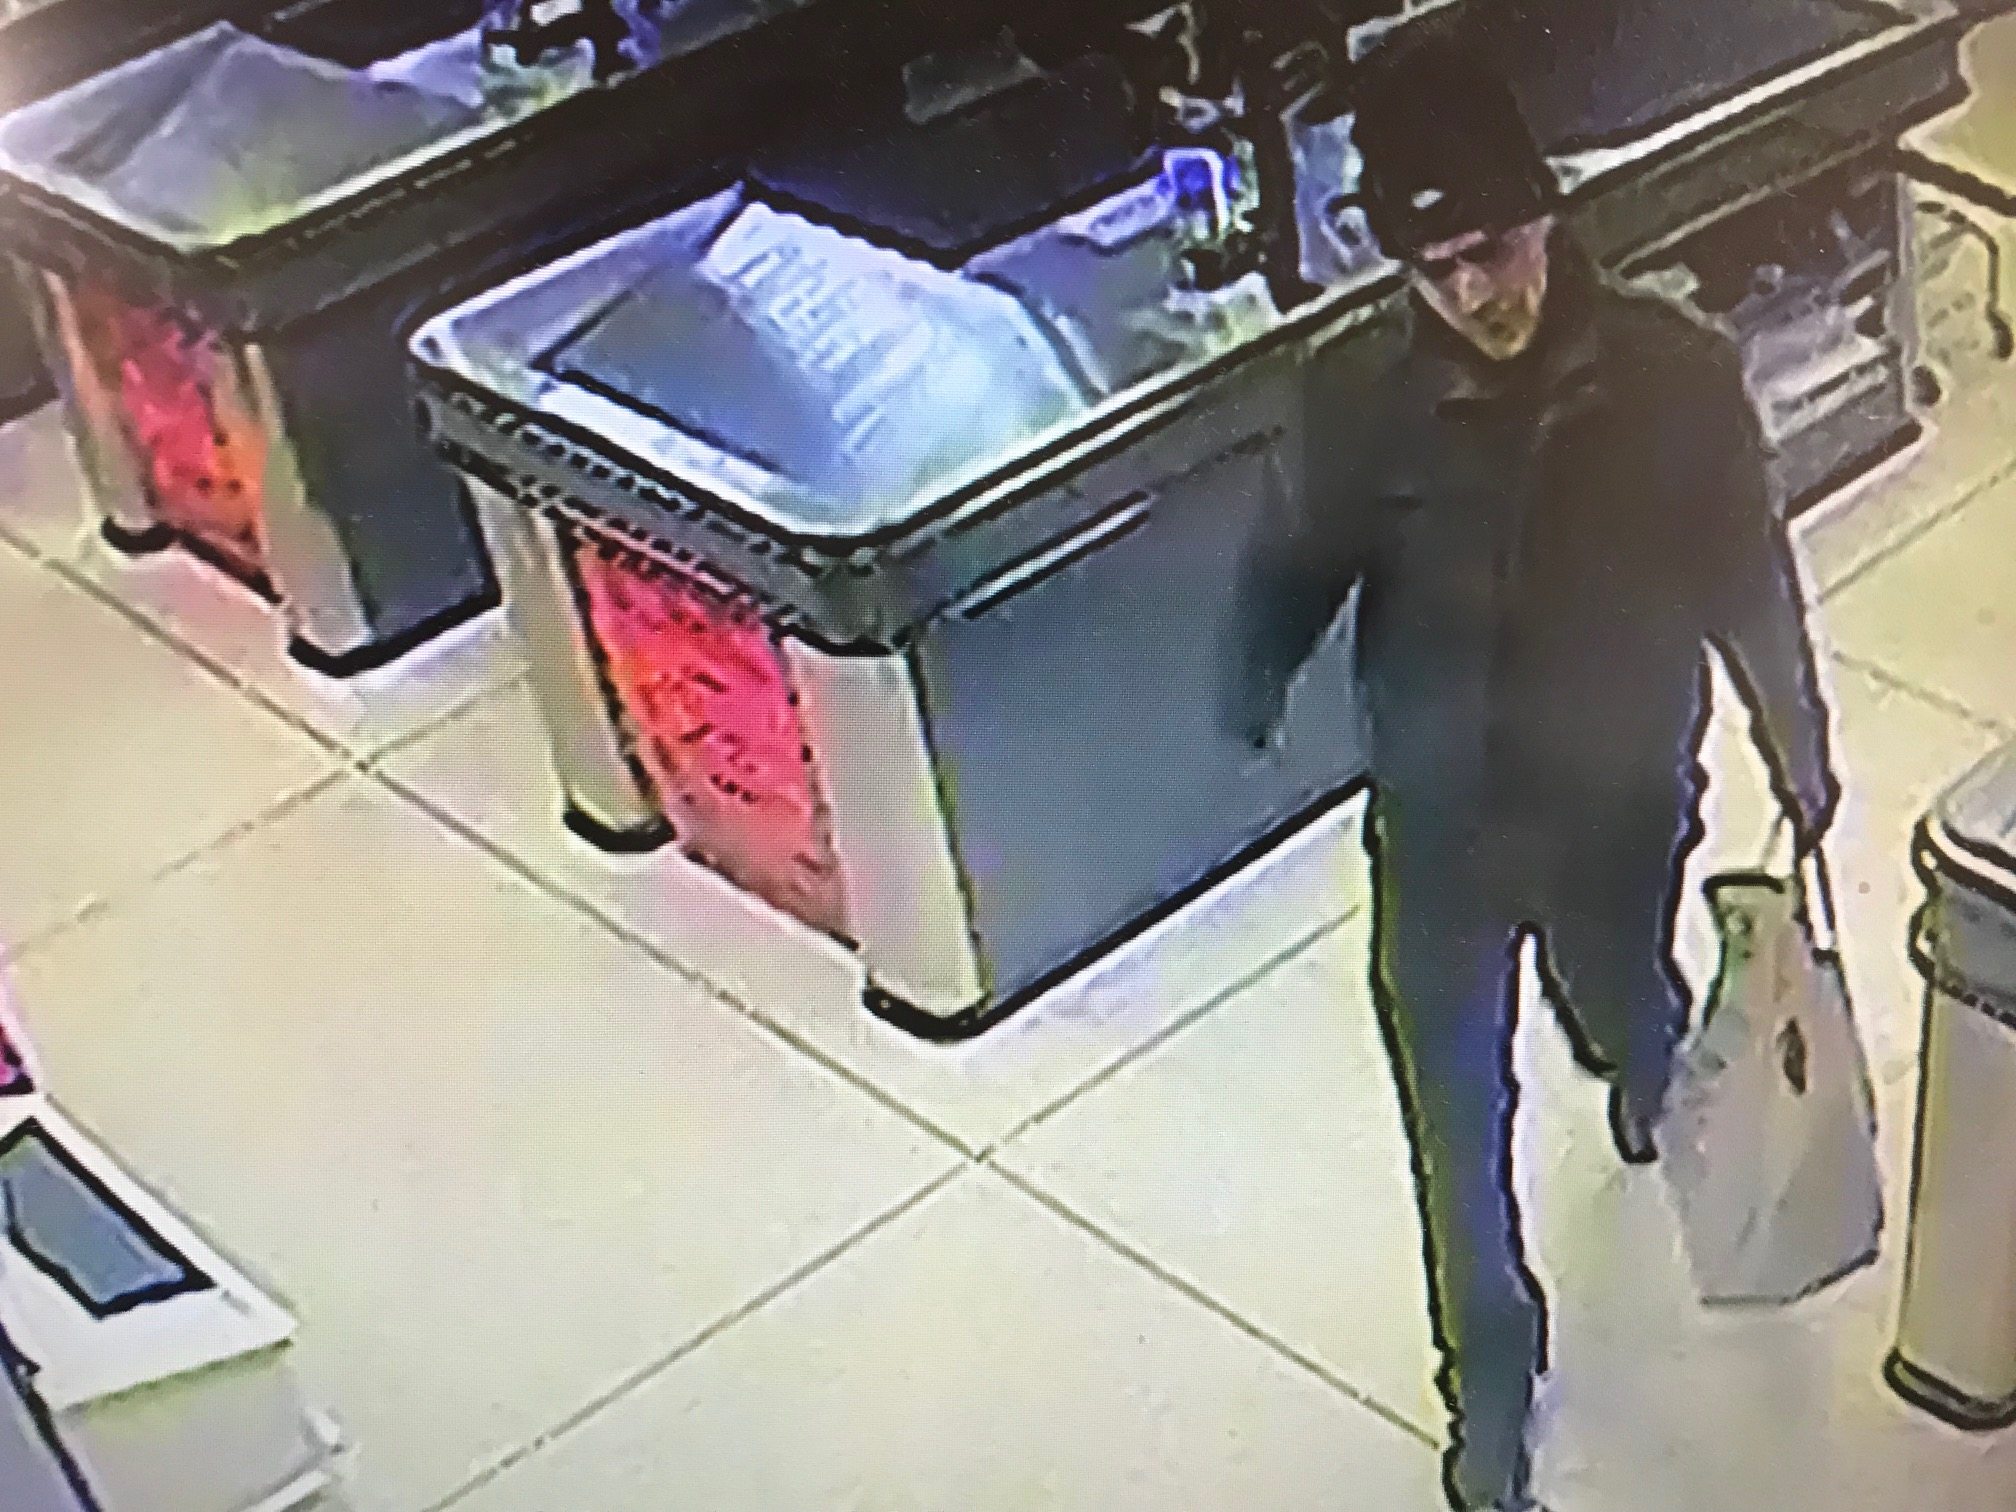 CCTV released after two injured during attempted theft